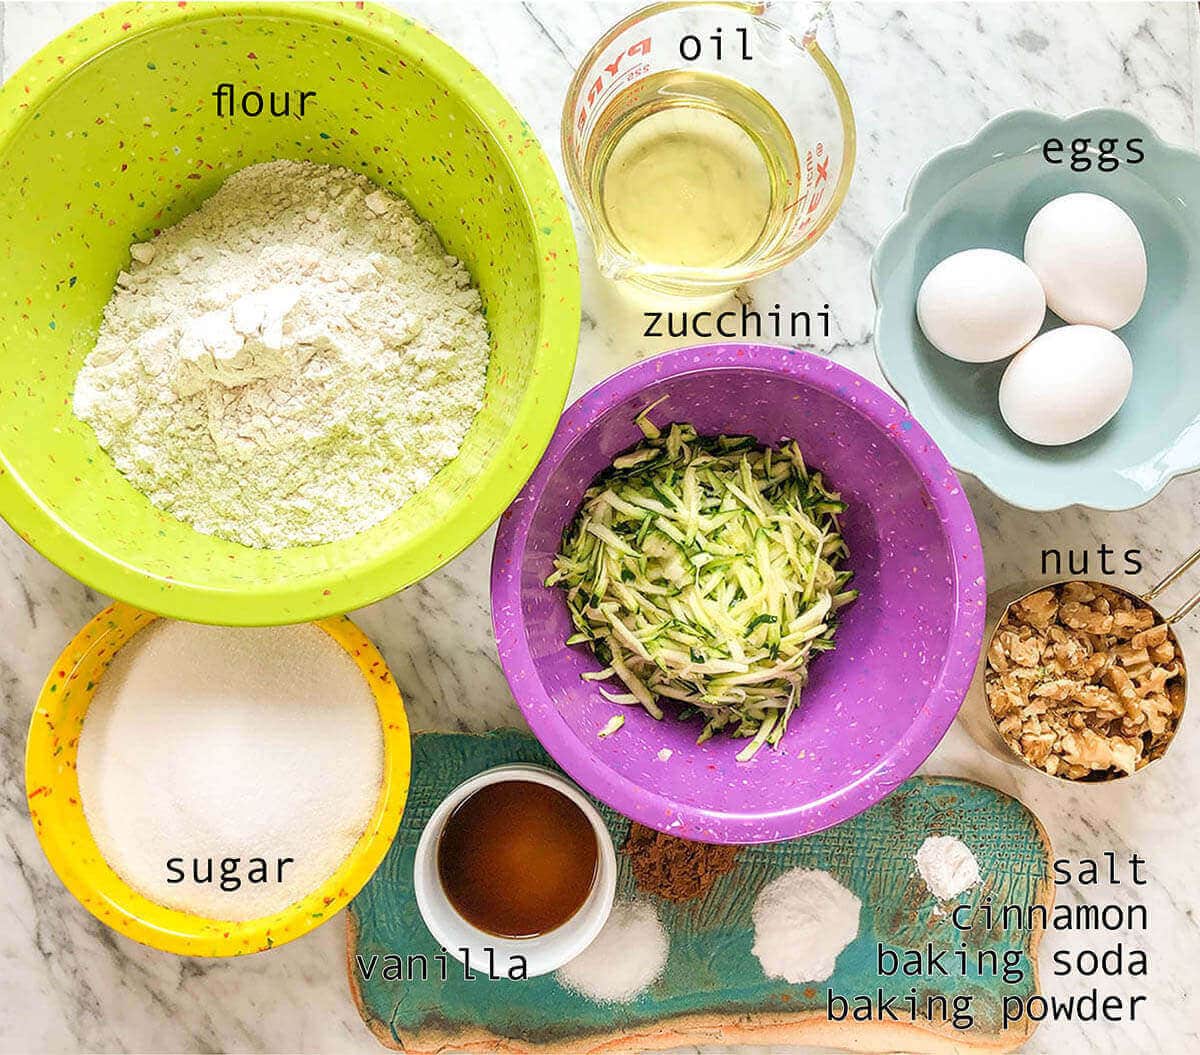 Ingredients for easy zucchini bread recipe, with print overlay.